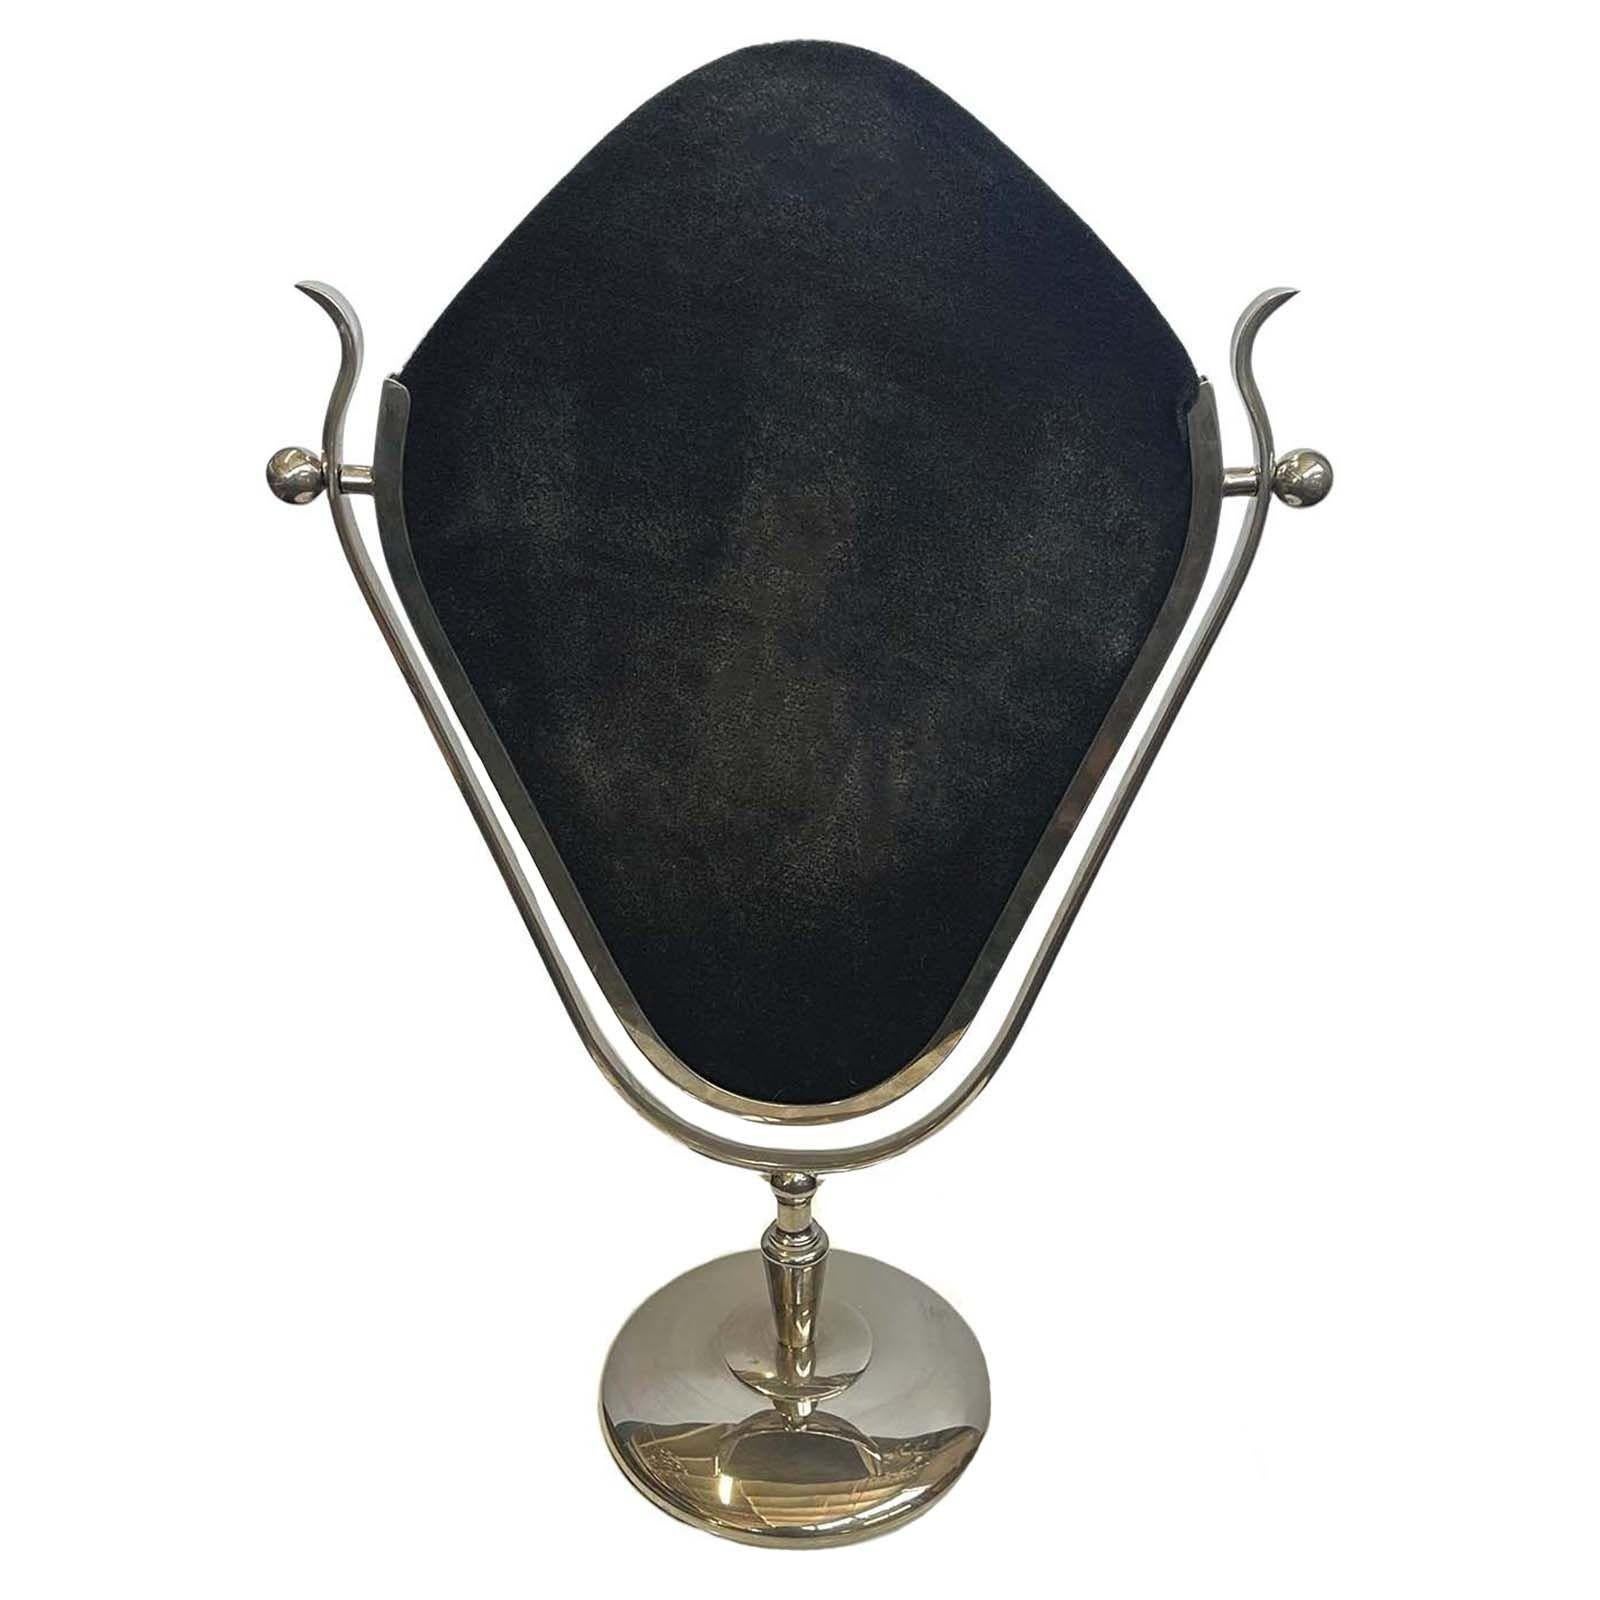 This stunning vanity mirror created by Charles Hollis Jones during the 1960's features a sleek frame meticulously crafted from nickel-plated metal, adding a touch of opulence and sophistication to any vanity or dressing area. With its clean lines